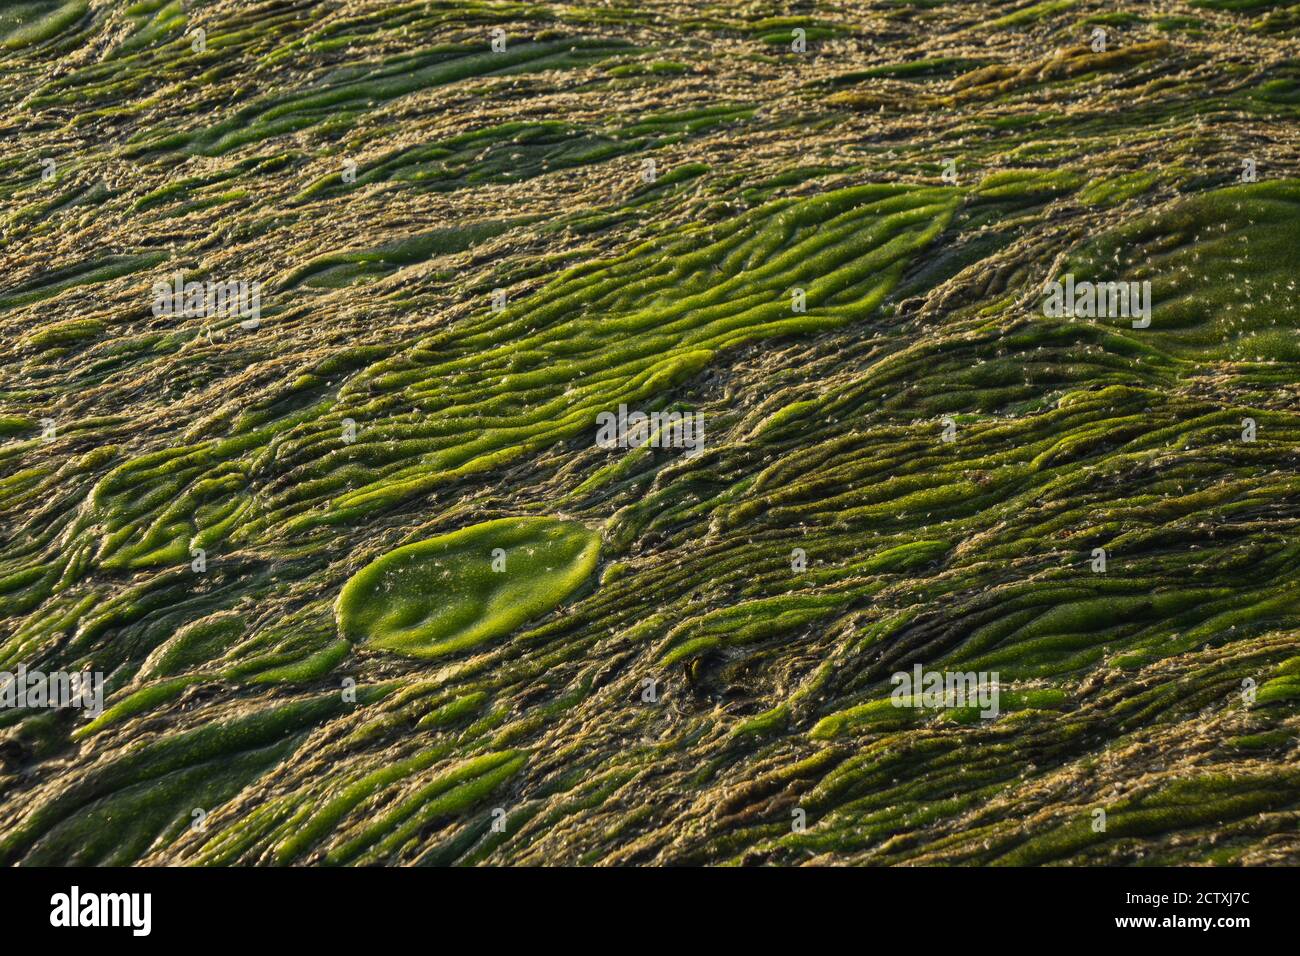 Green swampy abstract texture. View of algae and swamp close up. Abstract diagonal background. Stock Photo